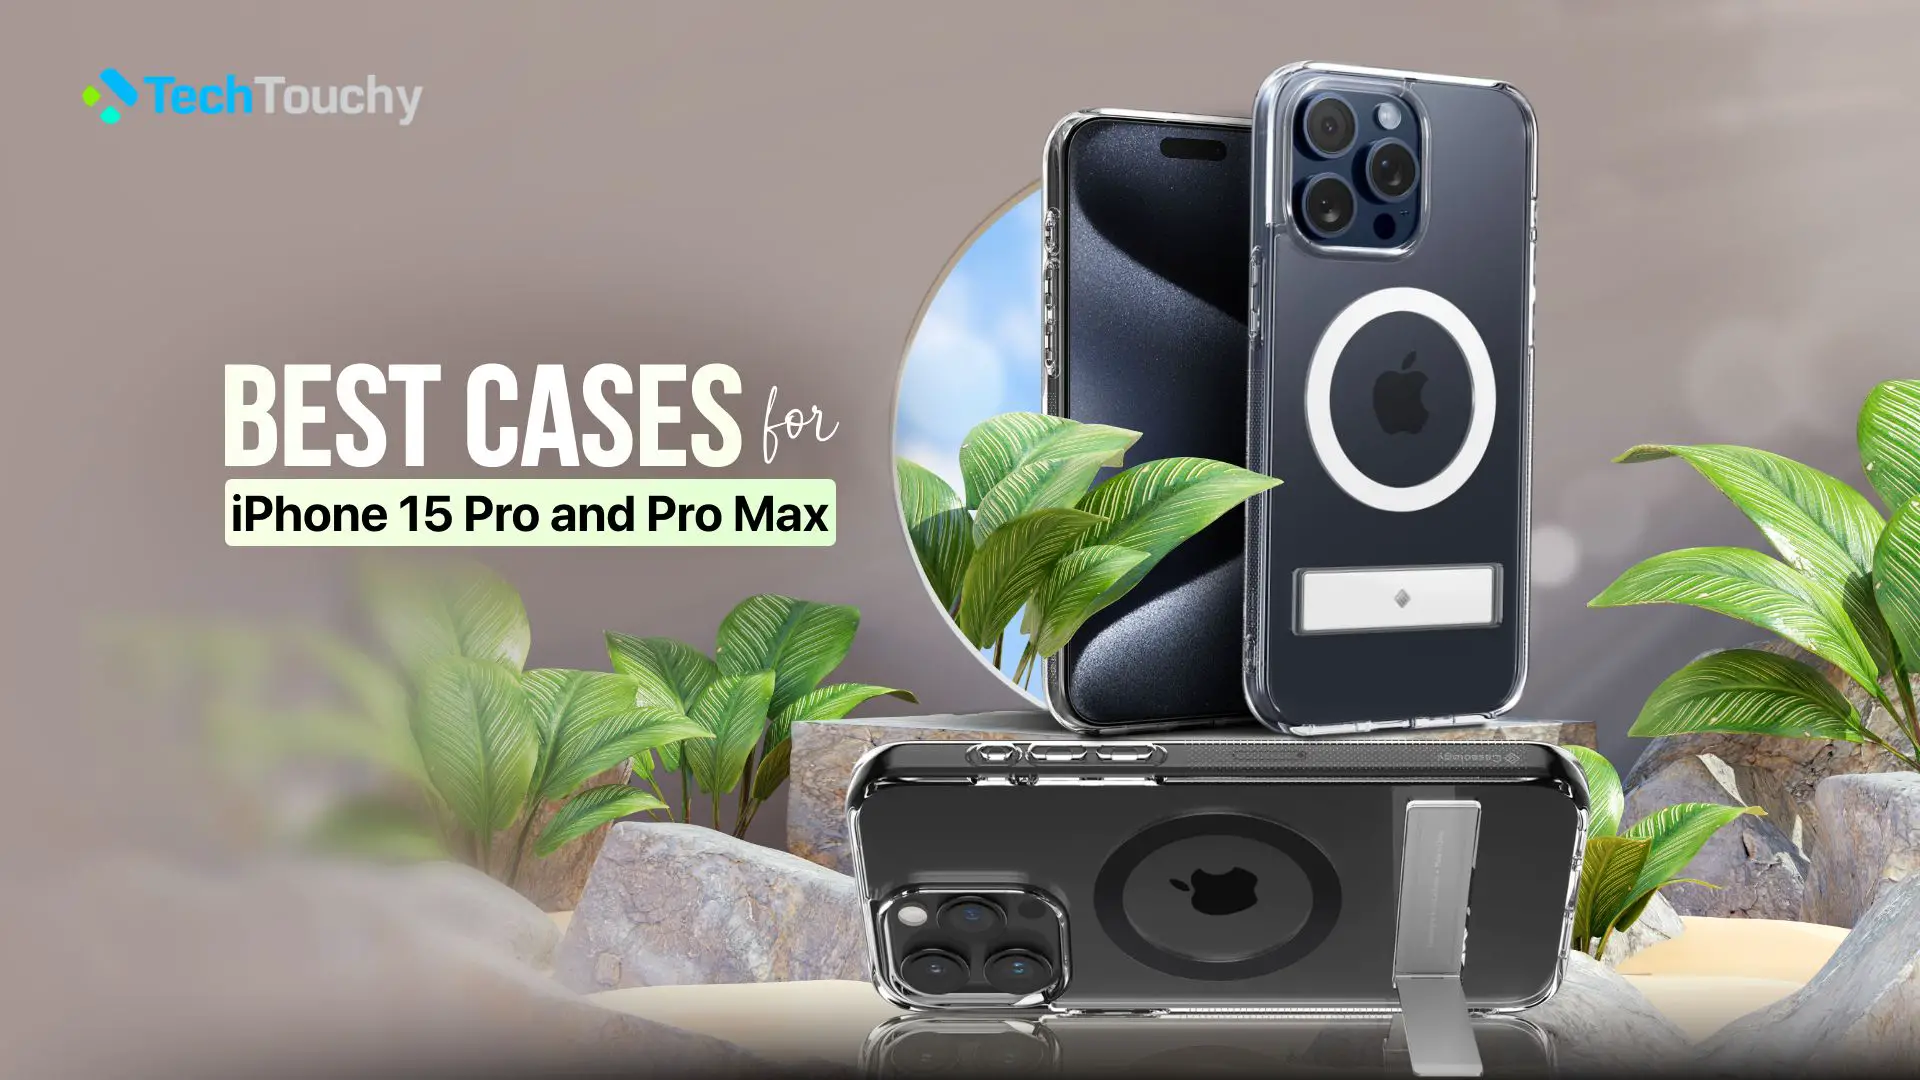 Best Cases for iPhone 15 Pro and Pro Max